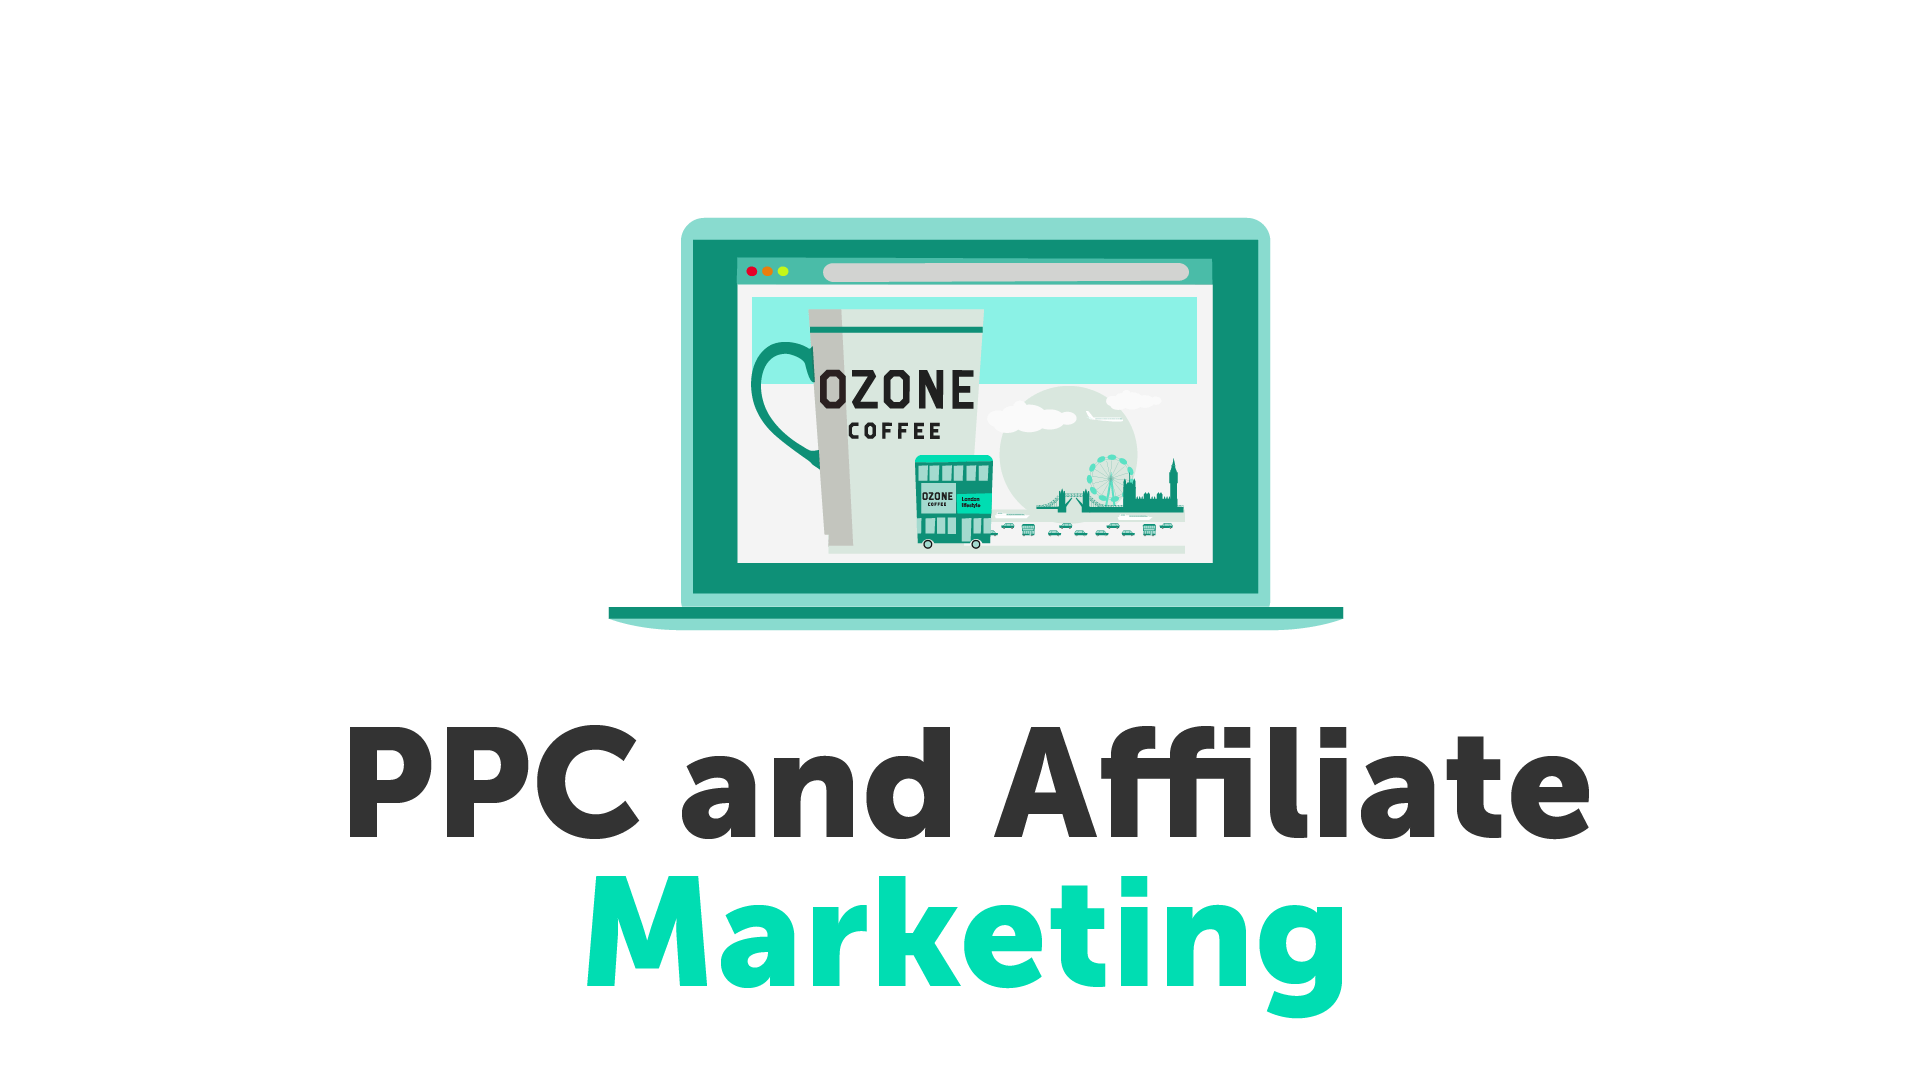 PPC and Affiliate Marketing